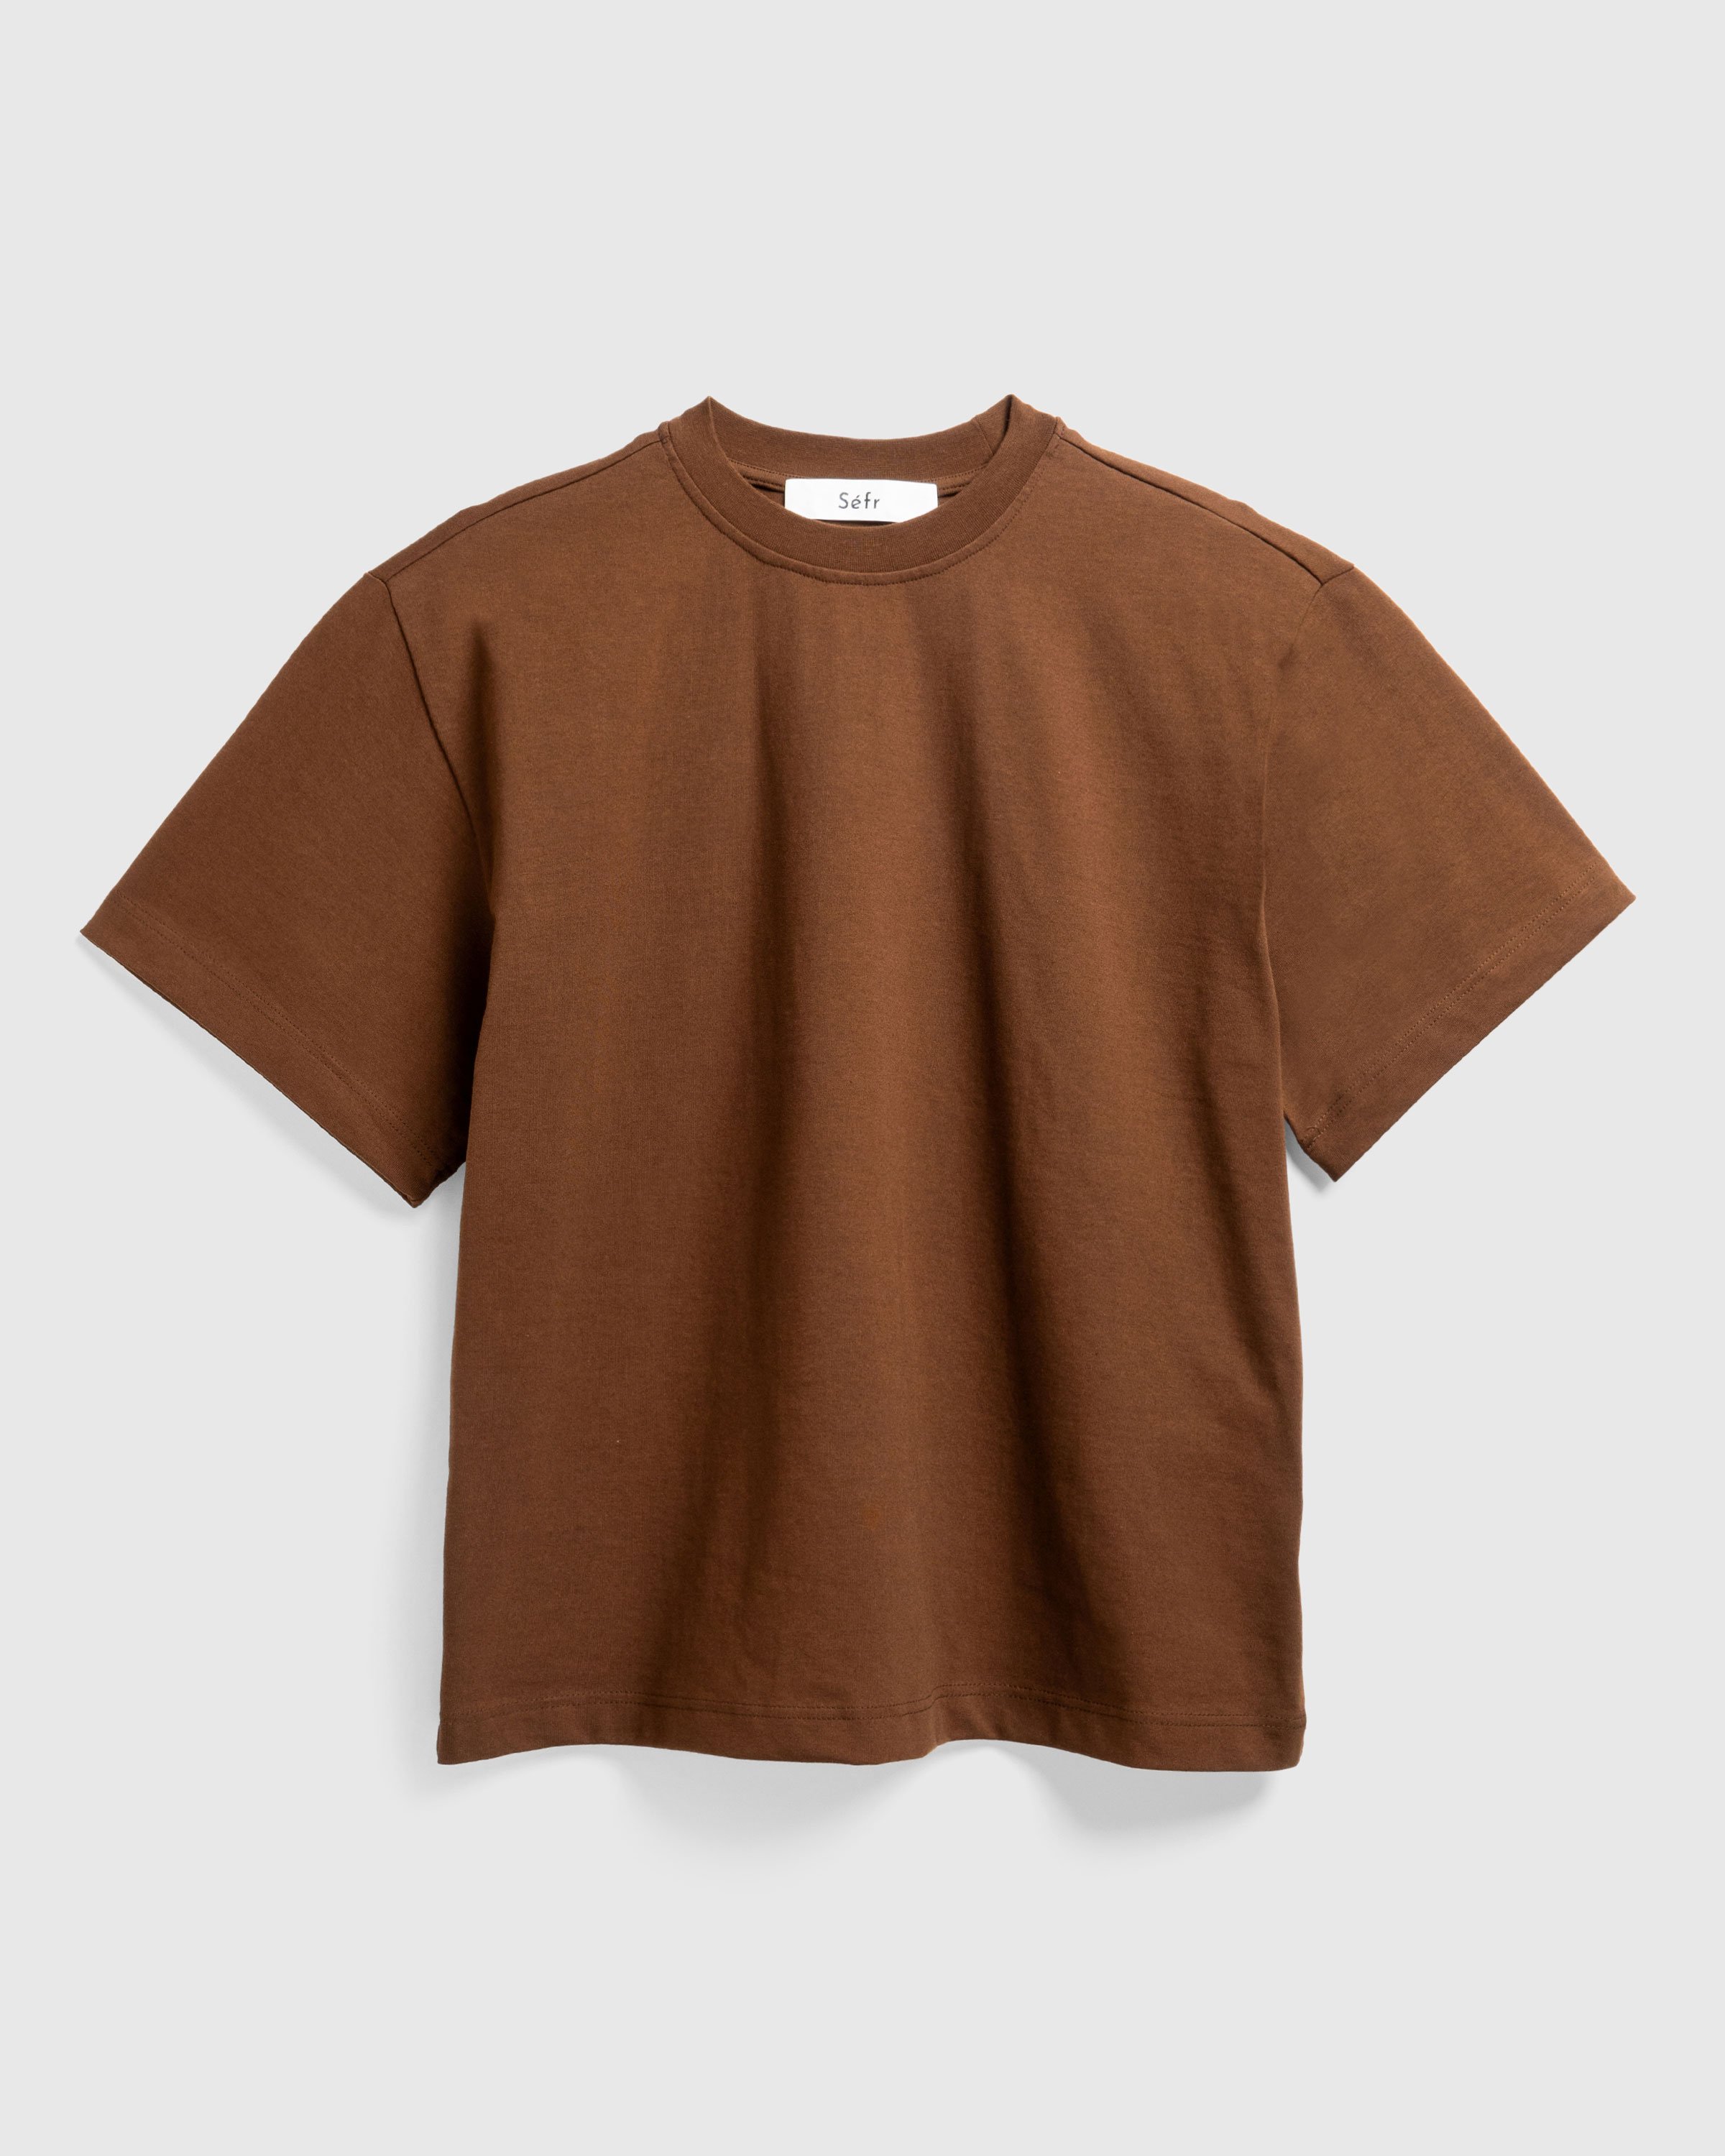 Séfr - ATELIER TEE HEAVY BROWN COTTON - Clothing - Brown - Image 1